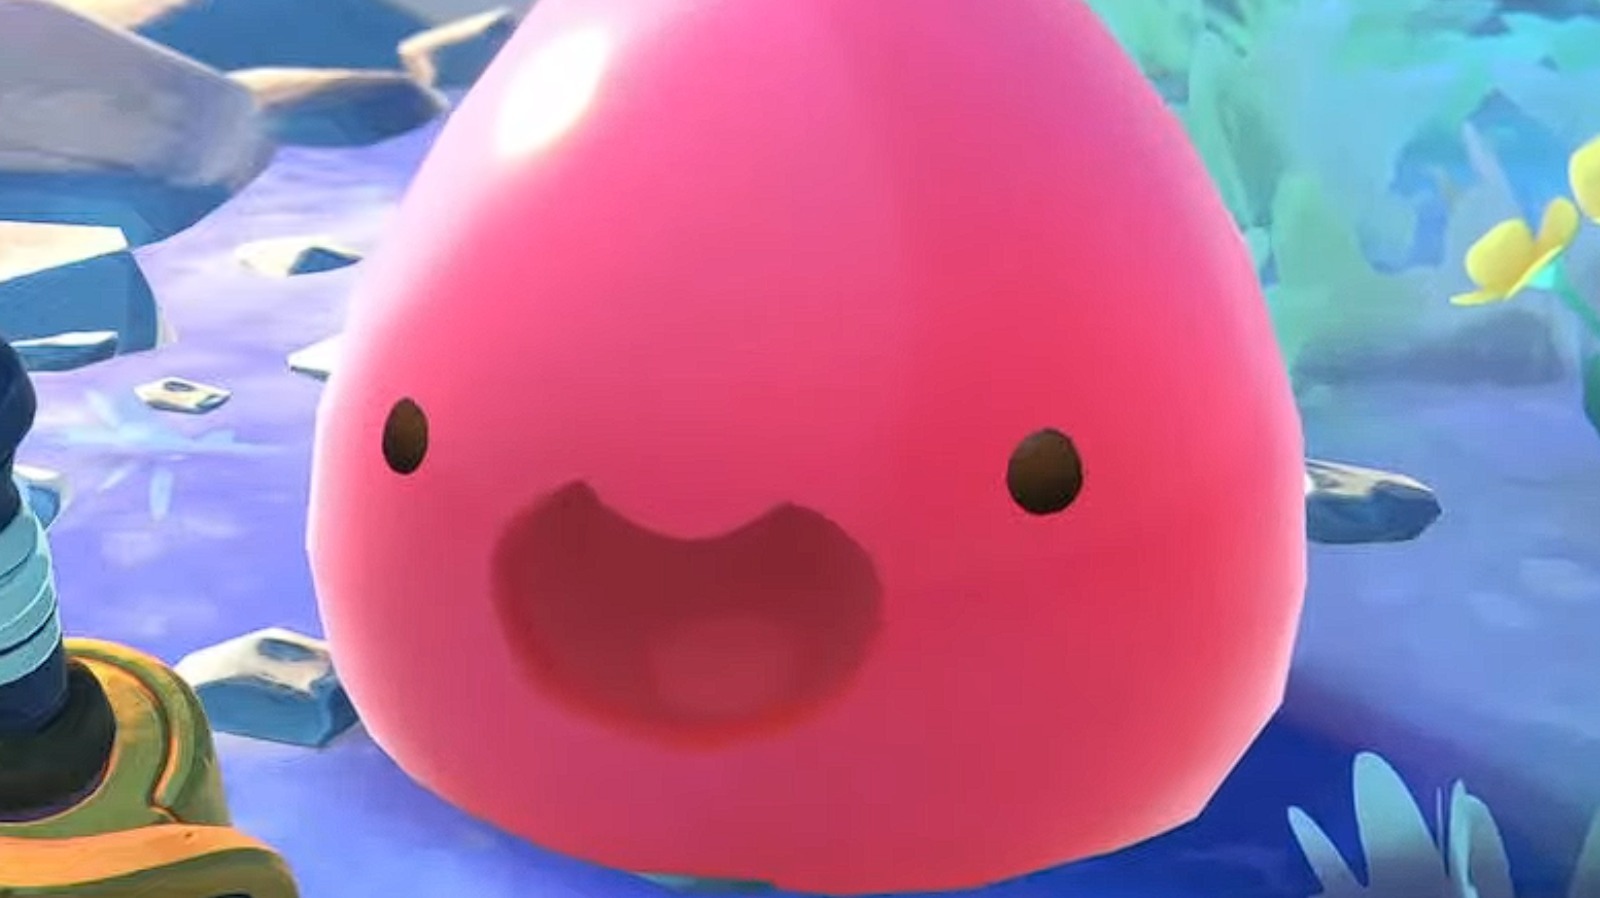 Slime Rancher 2: CONFIRMED Release Date Status & Latest Updates!